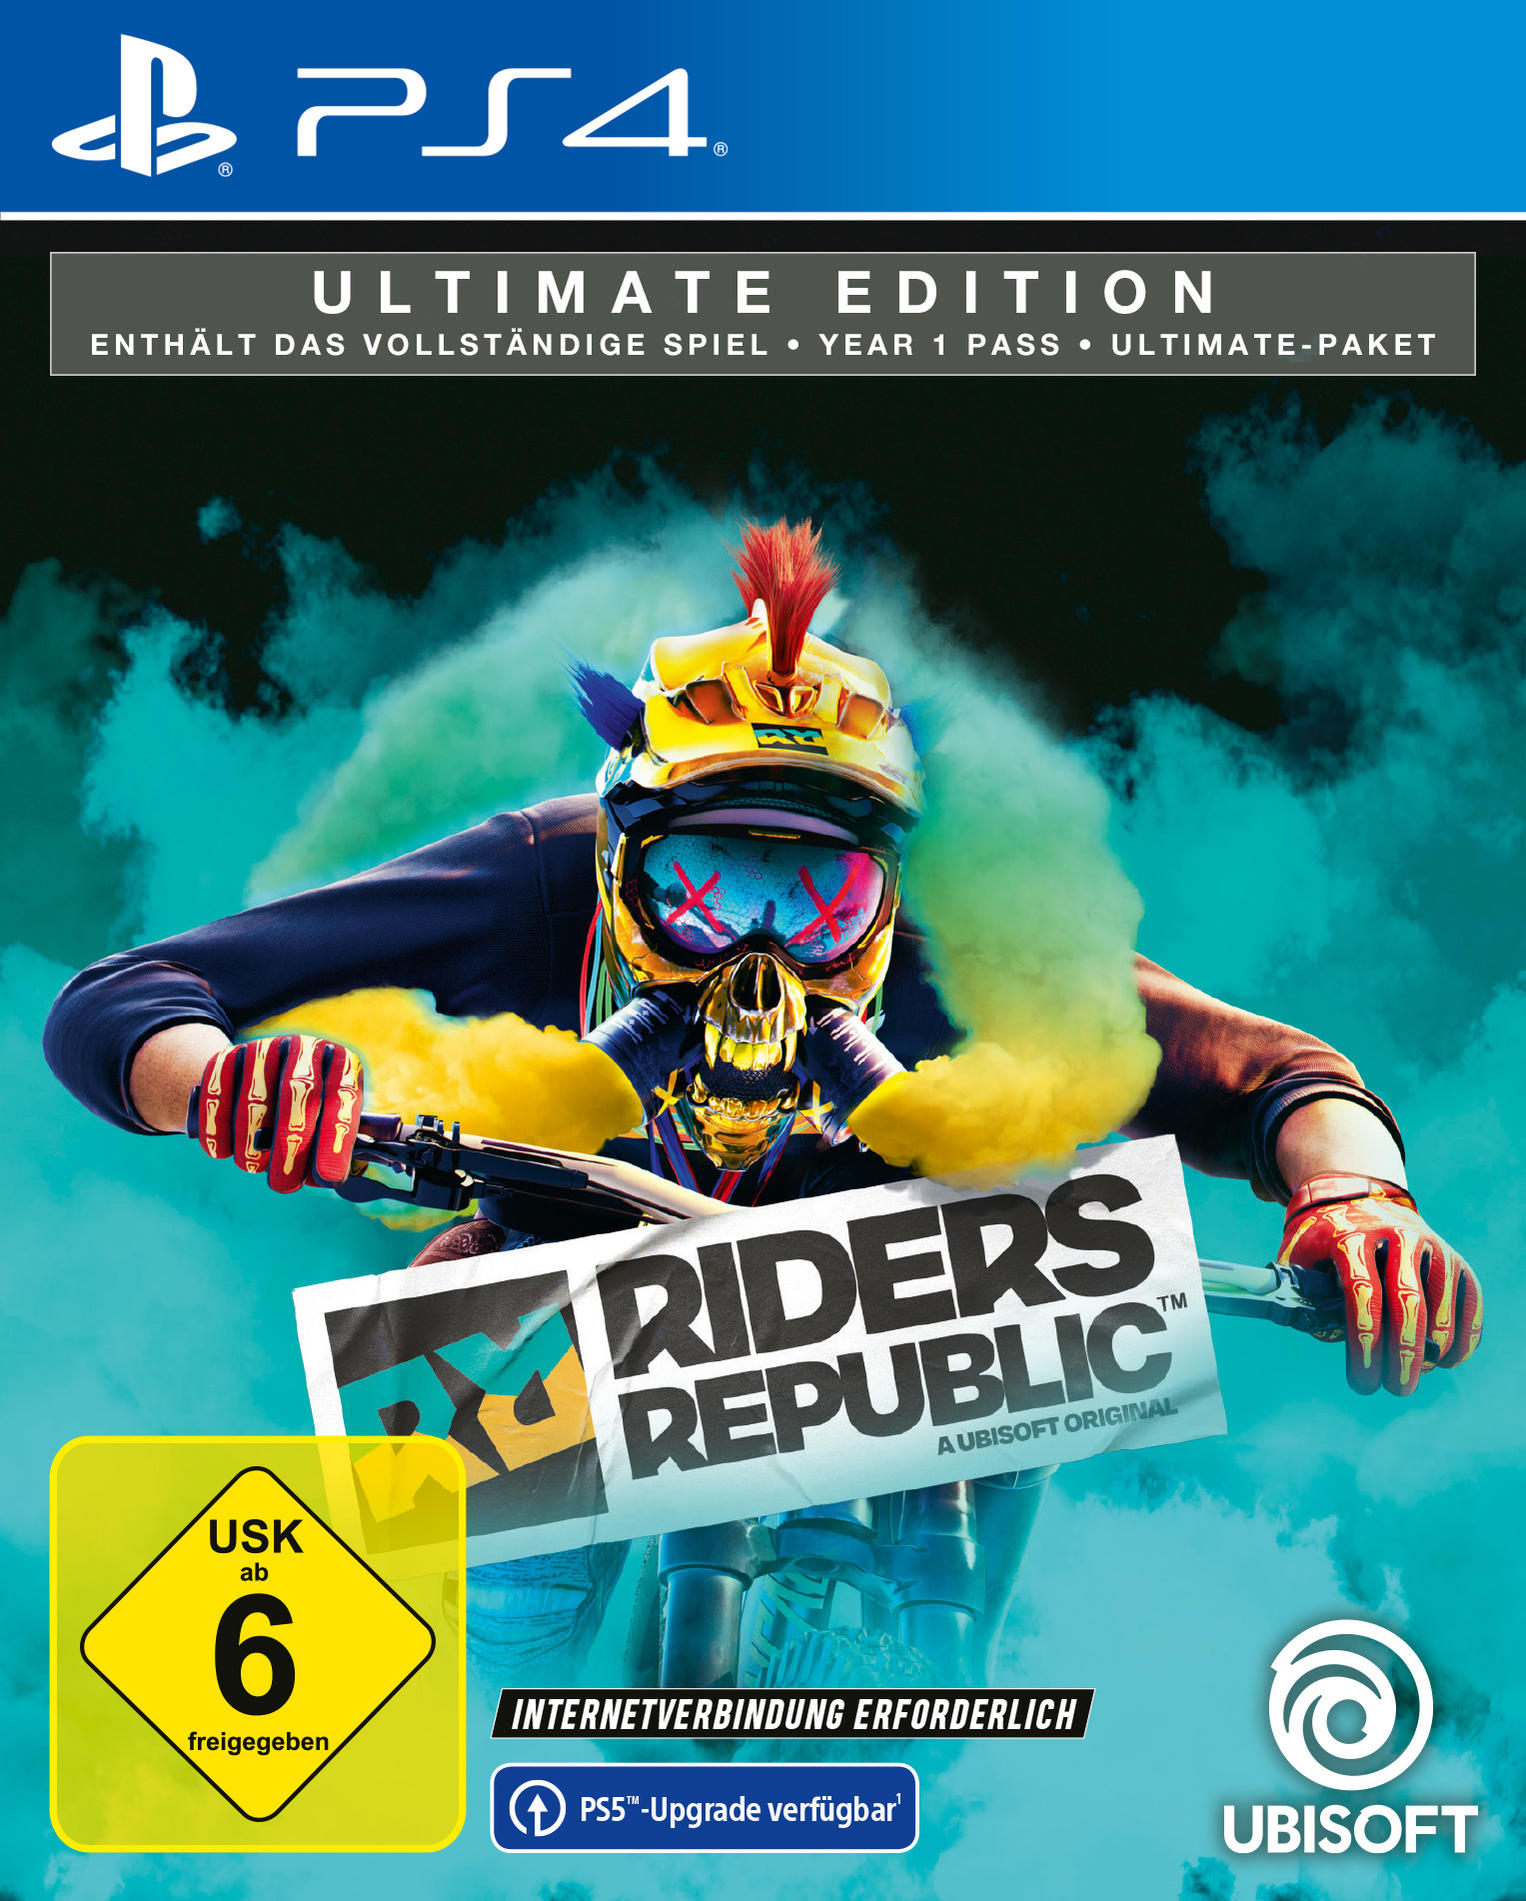 4] [PlayStation Ultimate Republic Riders - Edition -